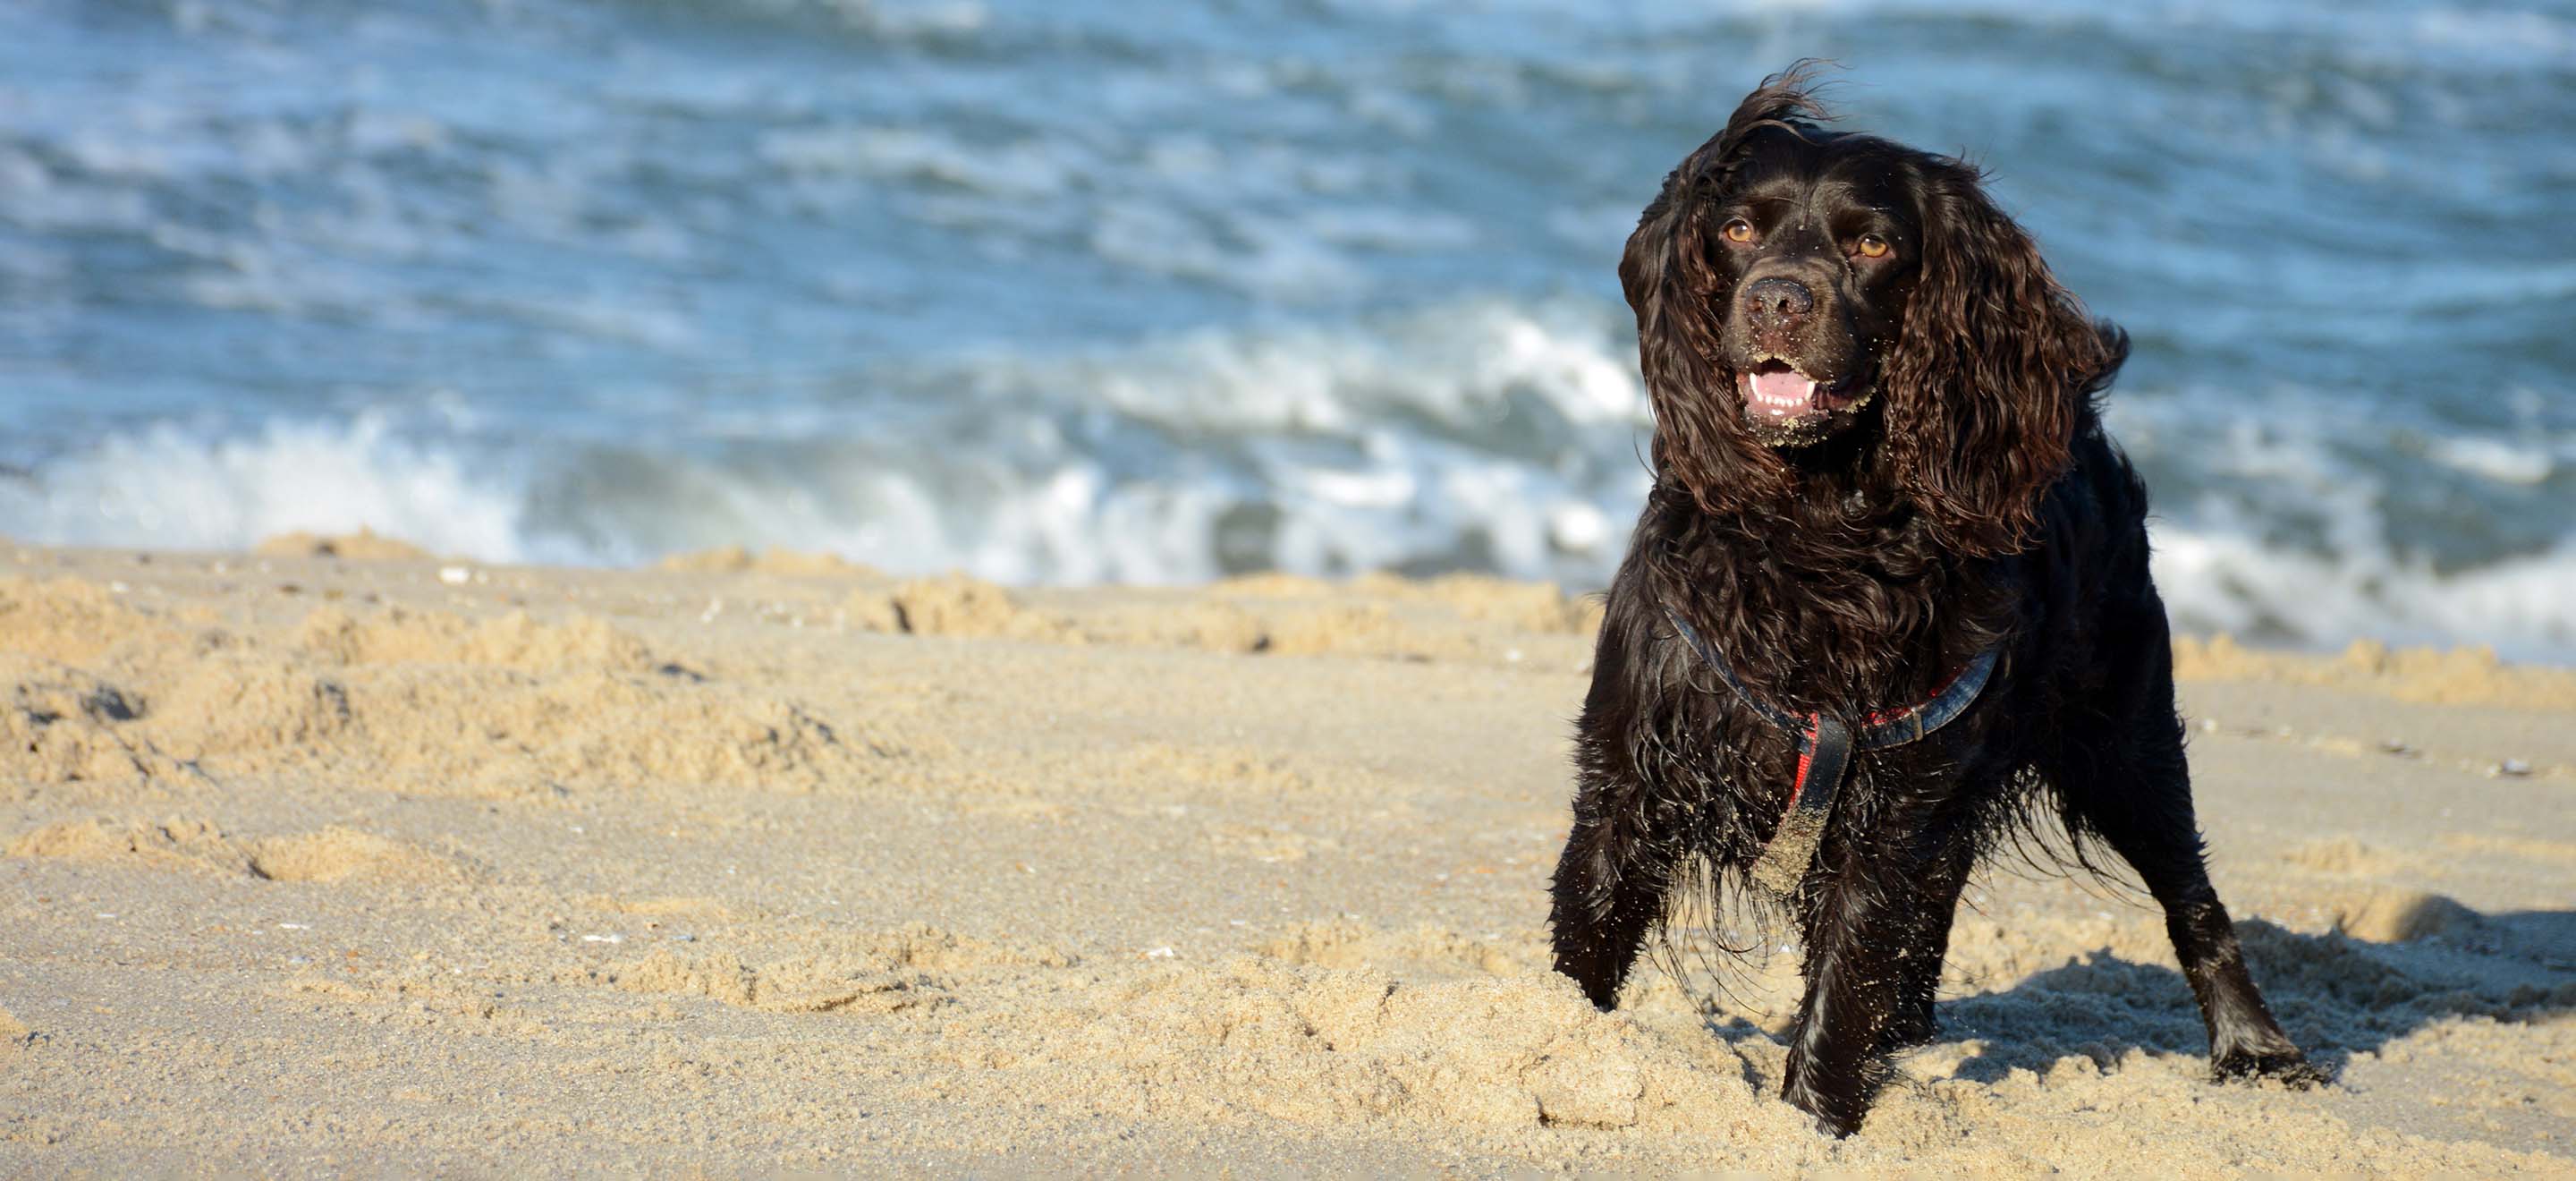 Dark Brown Boykin Spaniel standing in the sand at the beach image